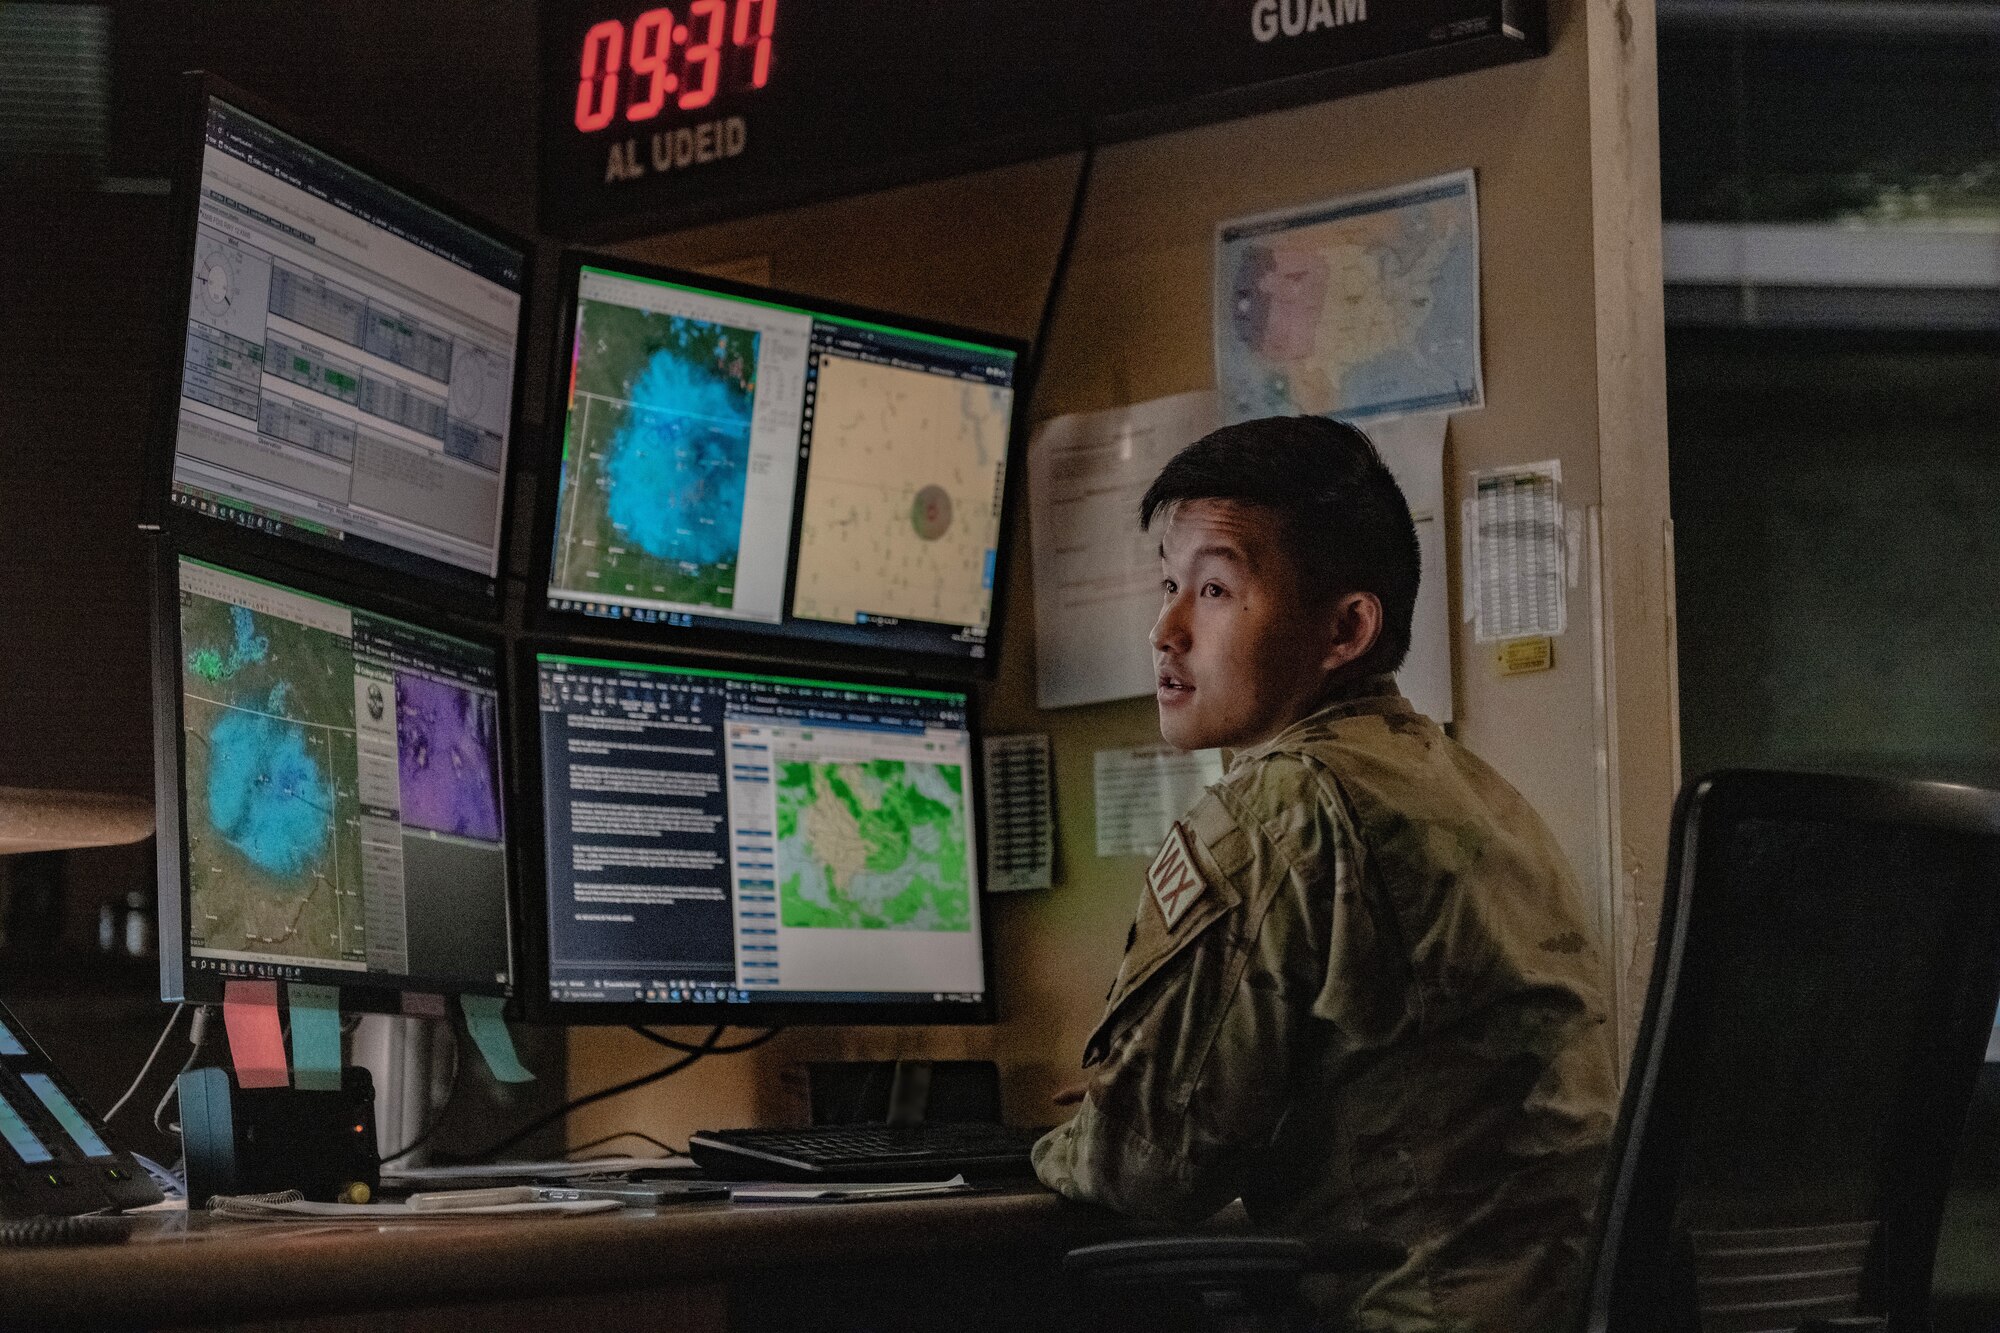 U.S. Air Force Airman 1st Class Benjamin Lo, 5th Operations Support Squadron weather forecaster, monitors the weather during Warbird Week at Minot Air Force Base, North Dakota, Aug. 11, 2023. The 5th OSS weather flight is responsible for forecasting and monitoring changes in weather to protect aircraft and assets from severe weather. Warbird Week is a multi-exercise event conducted by the 5th Bomb Wing to enhance training on generating nuclear-capable bombers capable of striking globally anytime, anywhere. (U.S. Air Force photo by Airman 1st Class Alyssa Bankston)